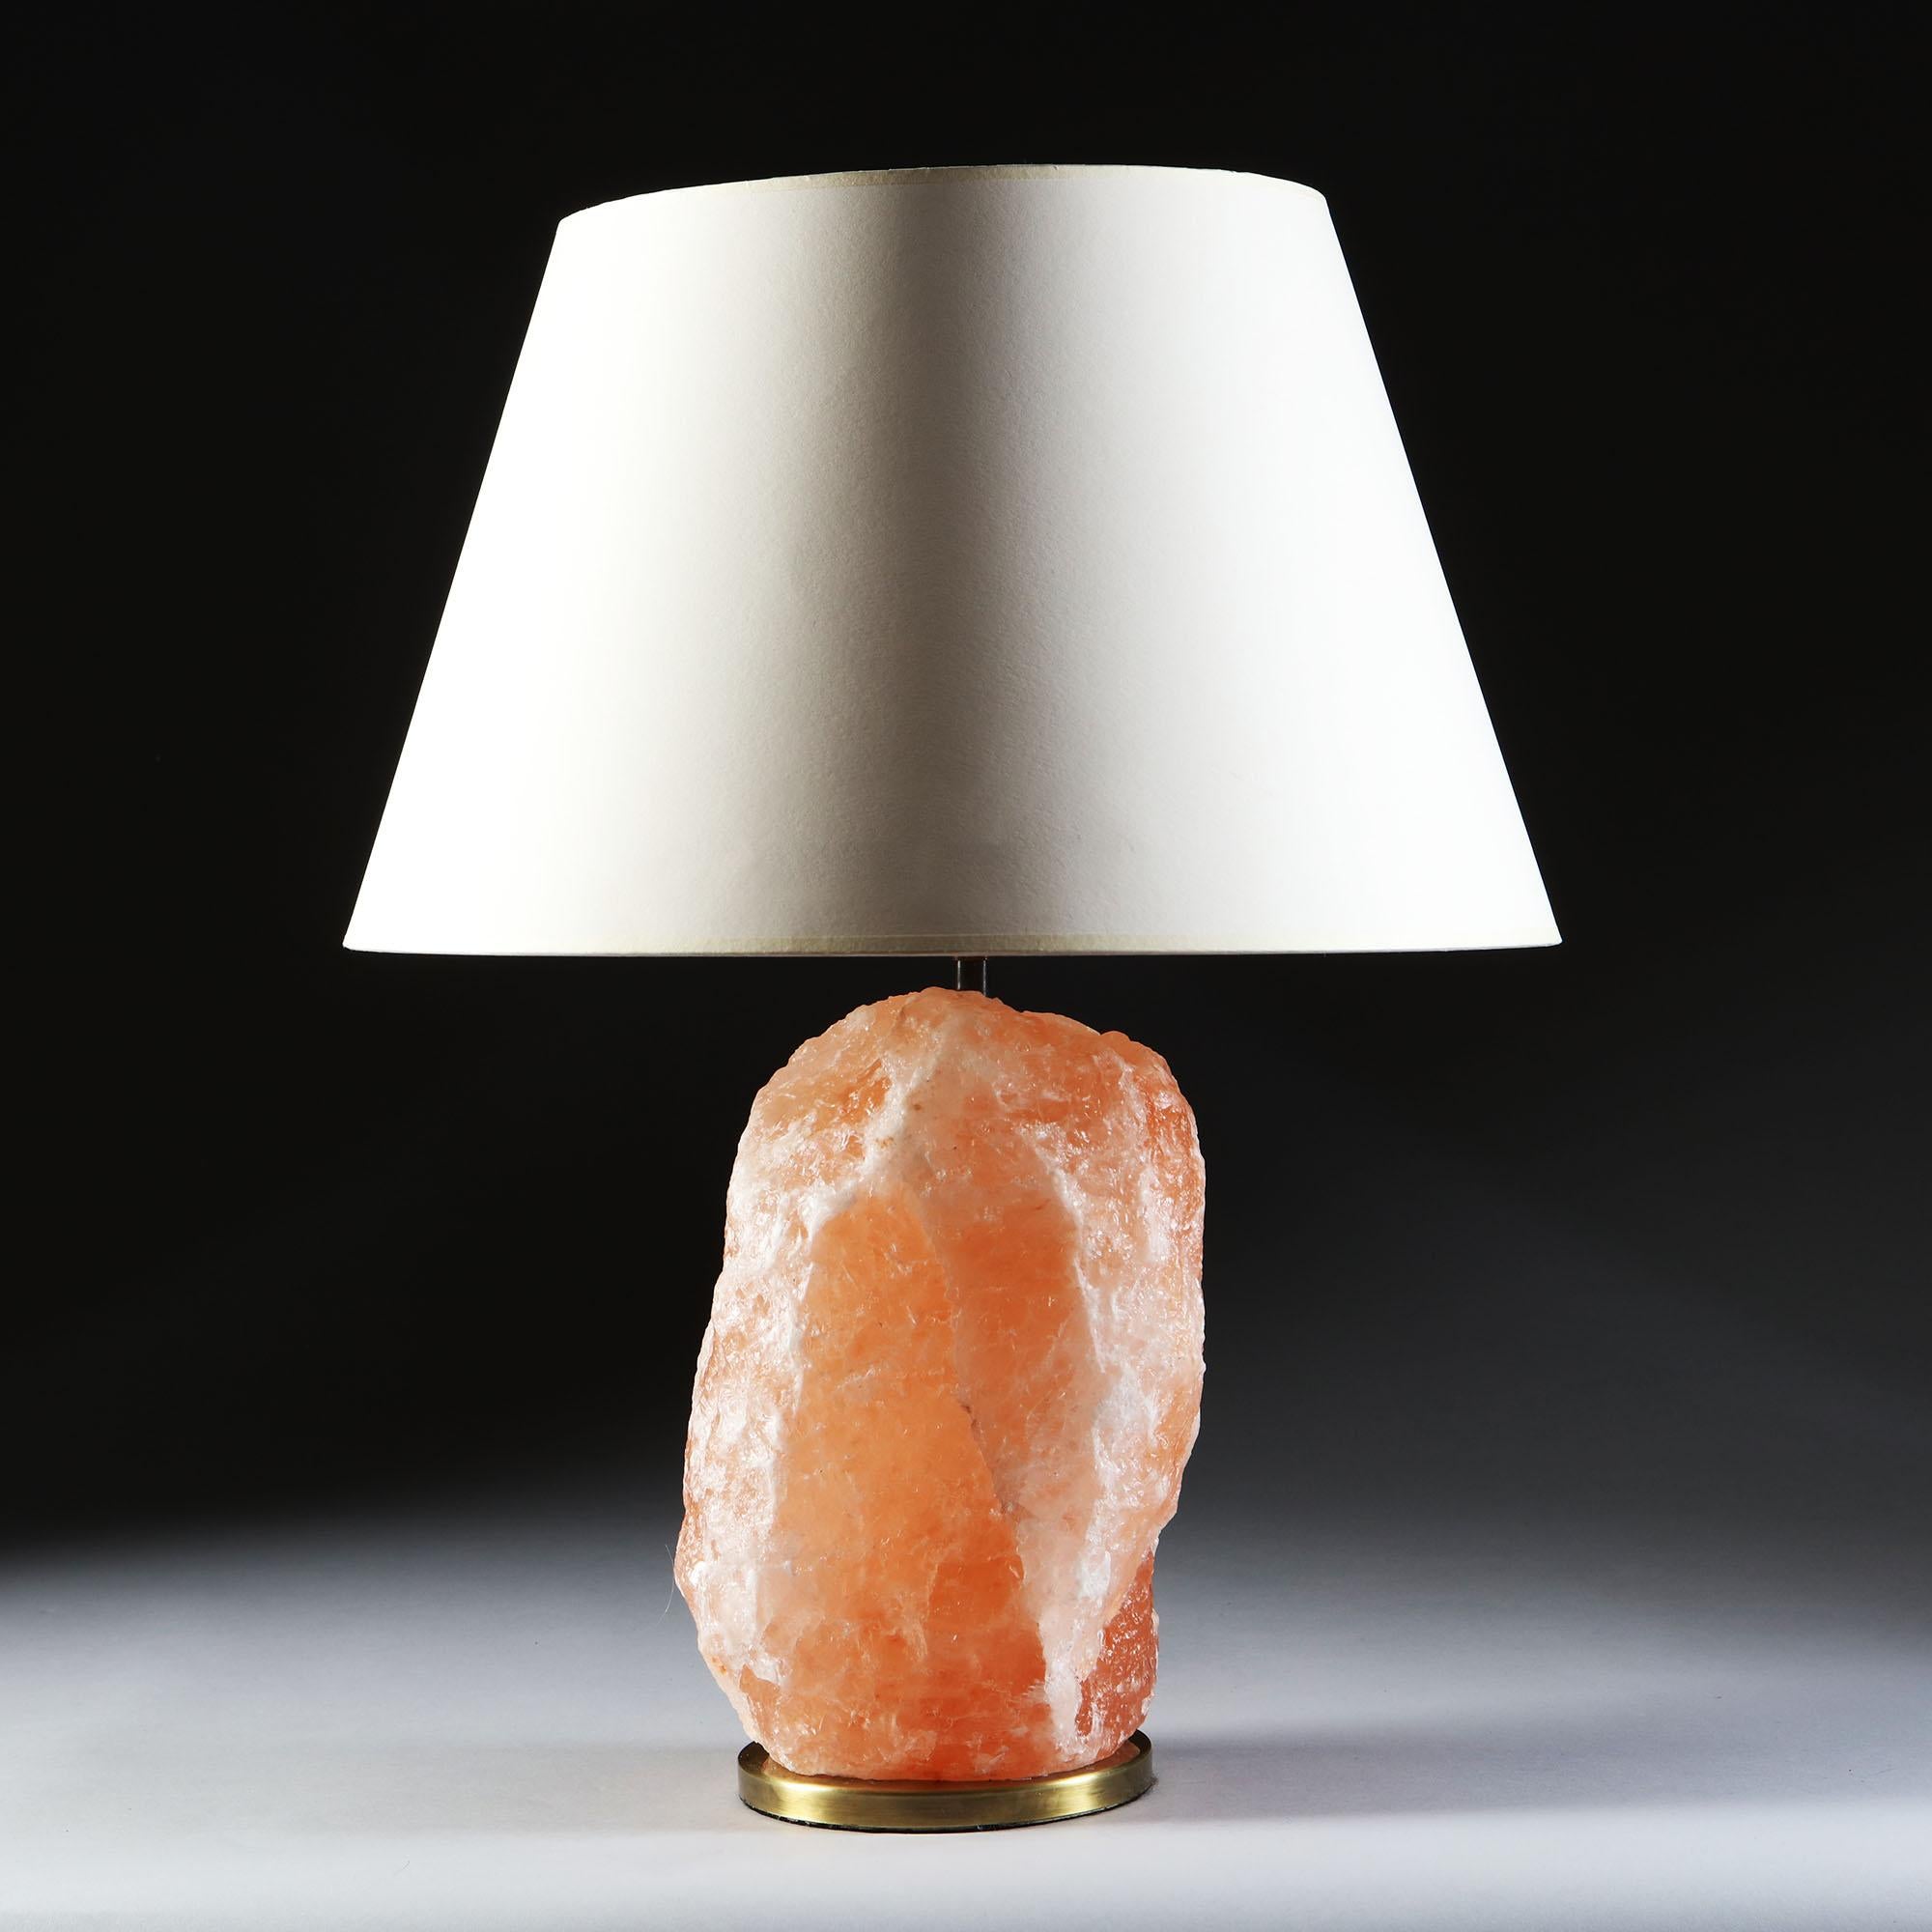 A 20th century pink rock crystal shard, mounted as a table lamp, with a circular brass bass.

Currently wired for the UK. Please enquire for rewiring services.

Please note: lampshade note included.